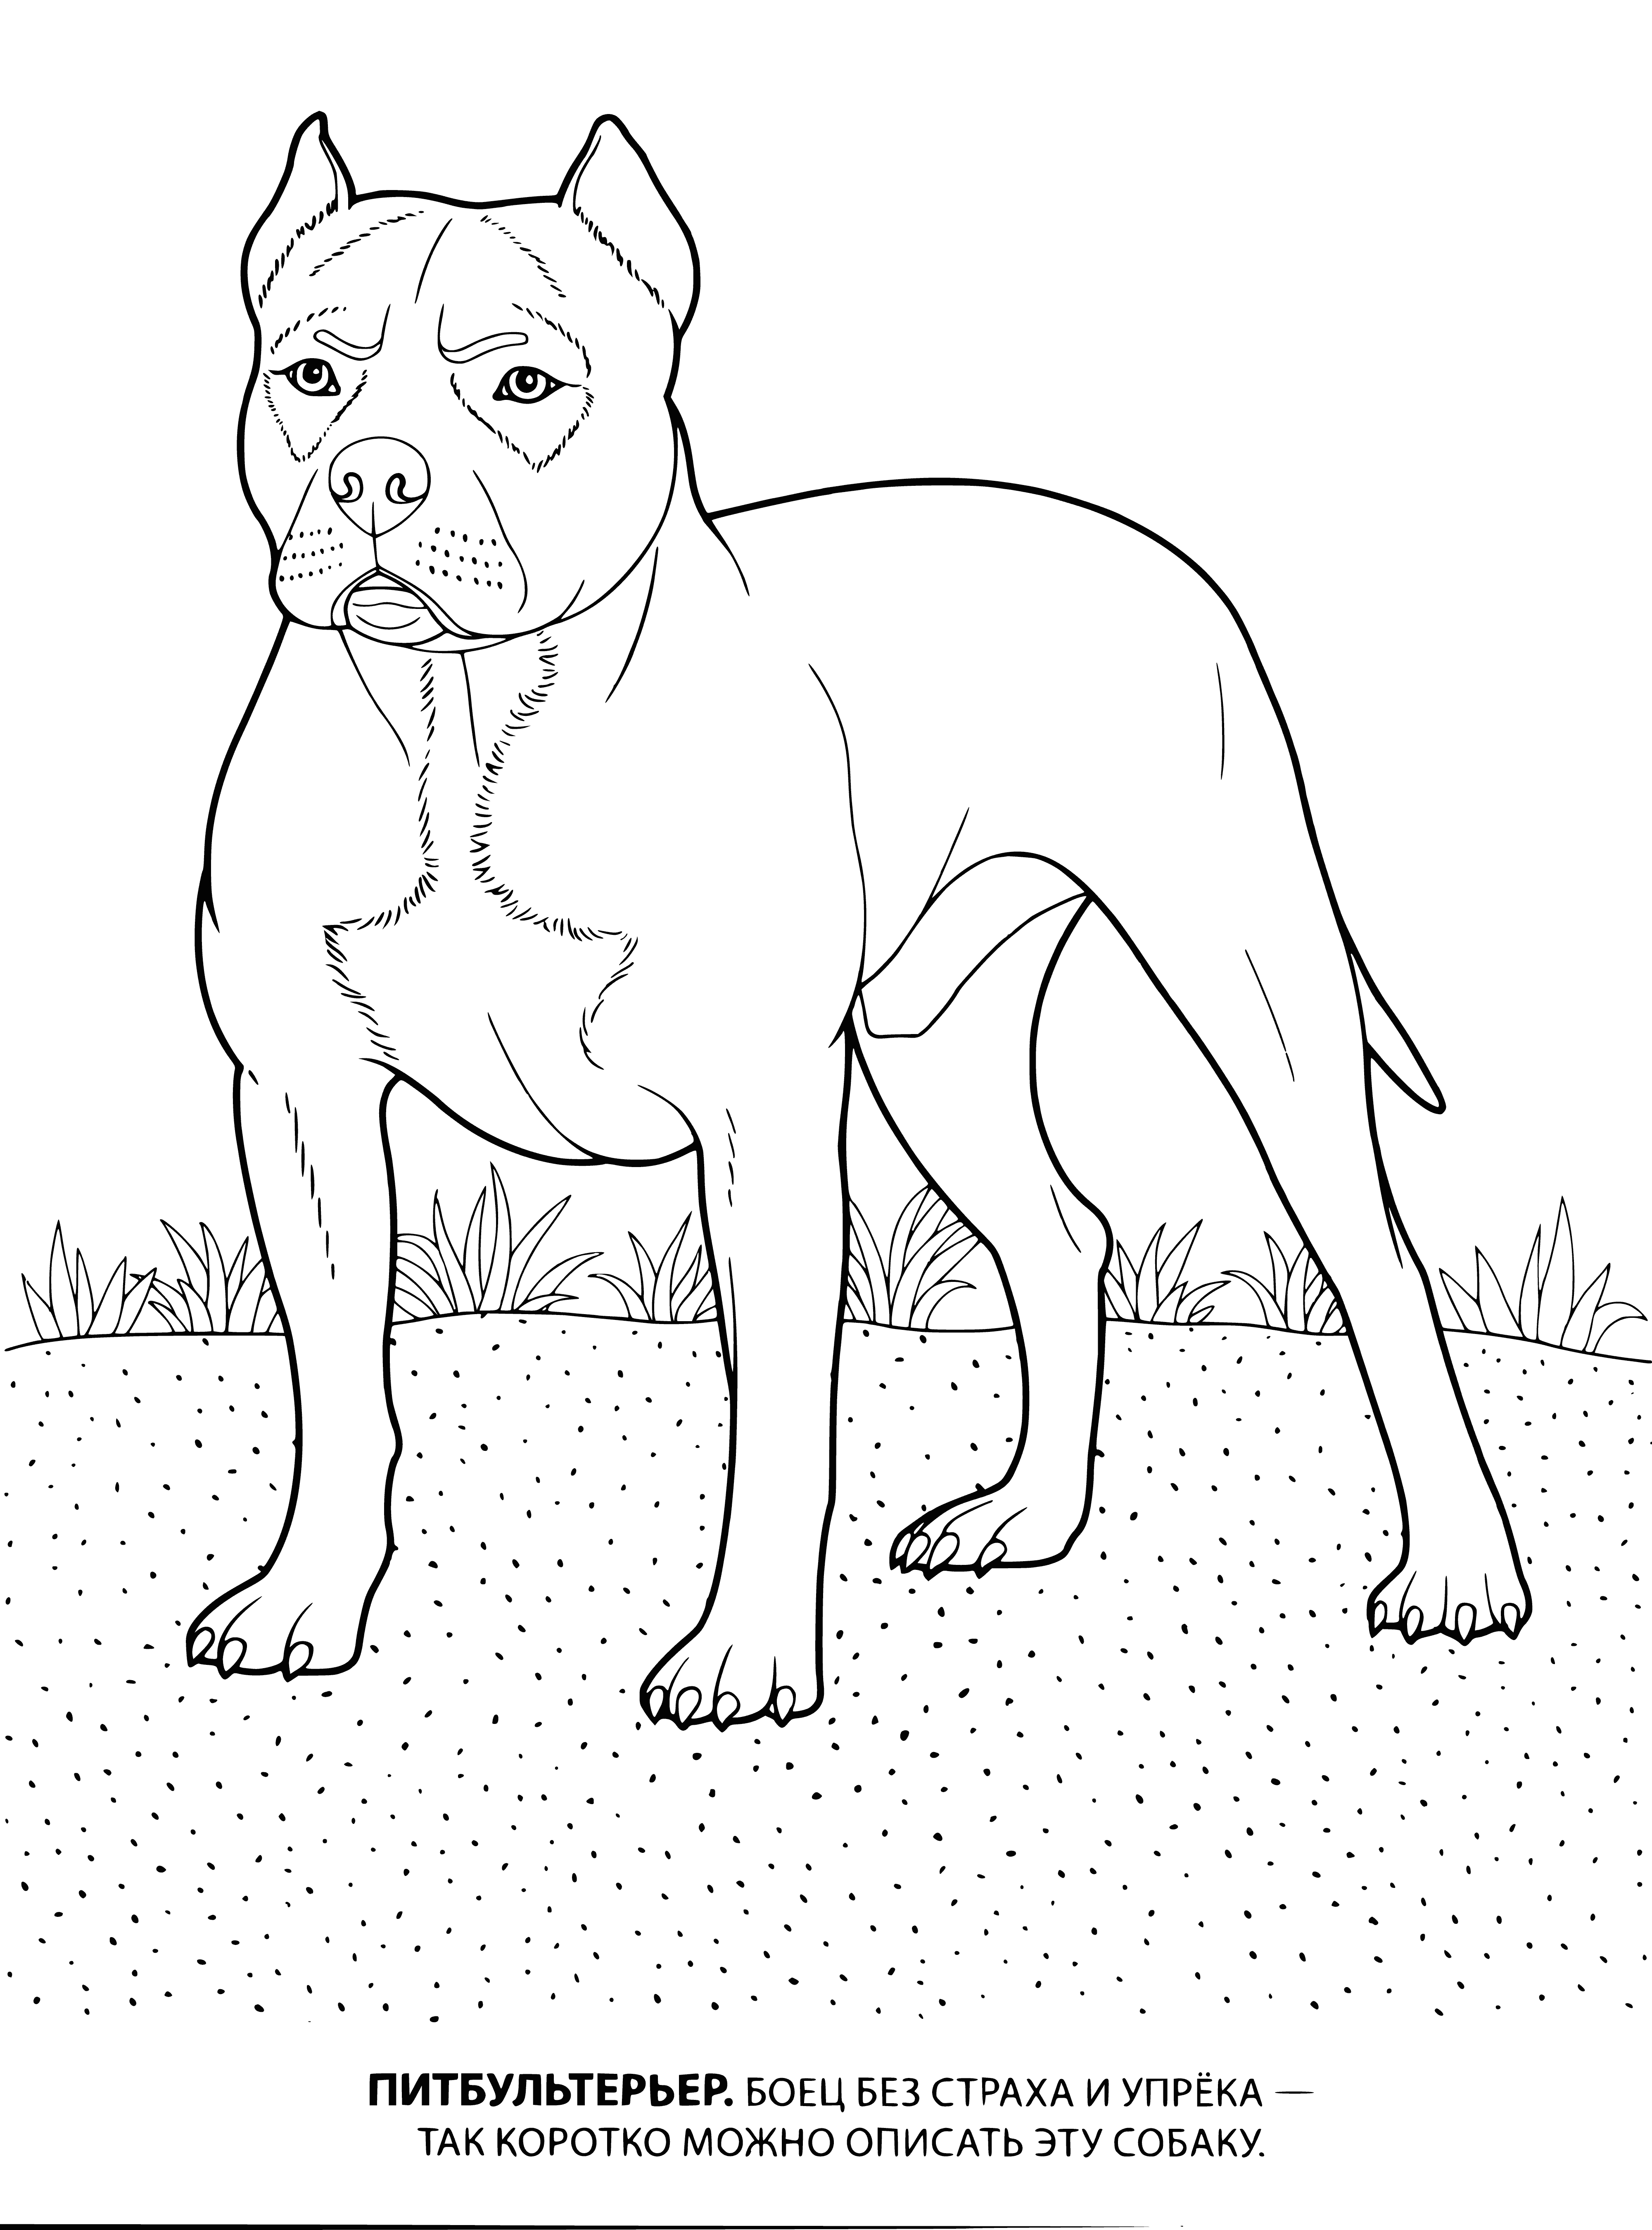 Pit bull terrier coloring page